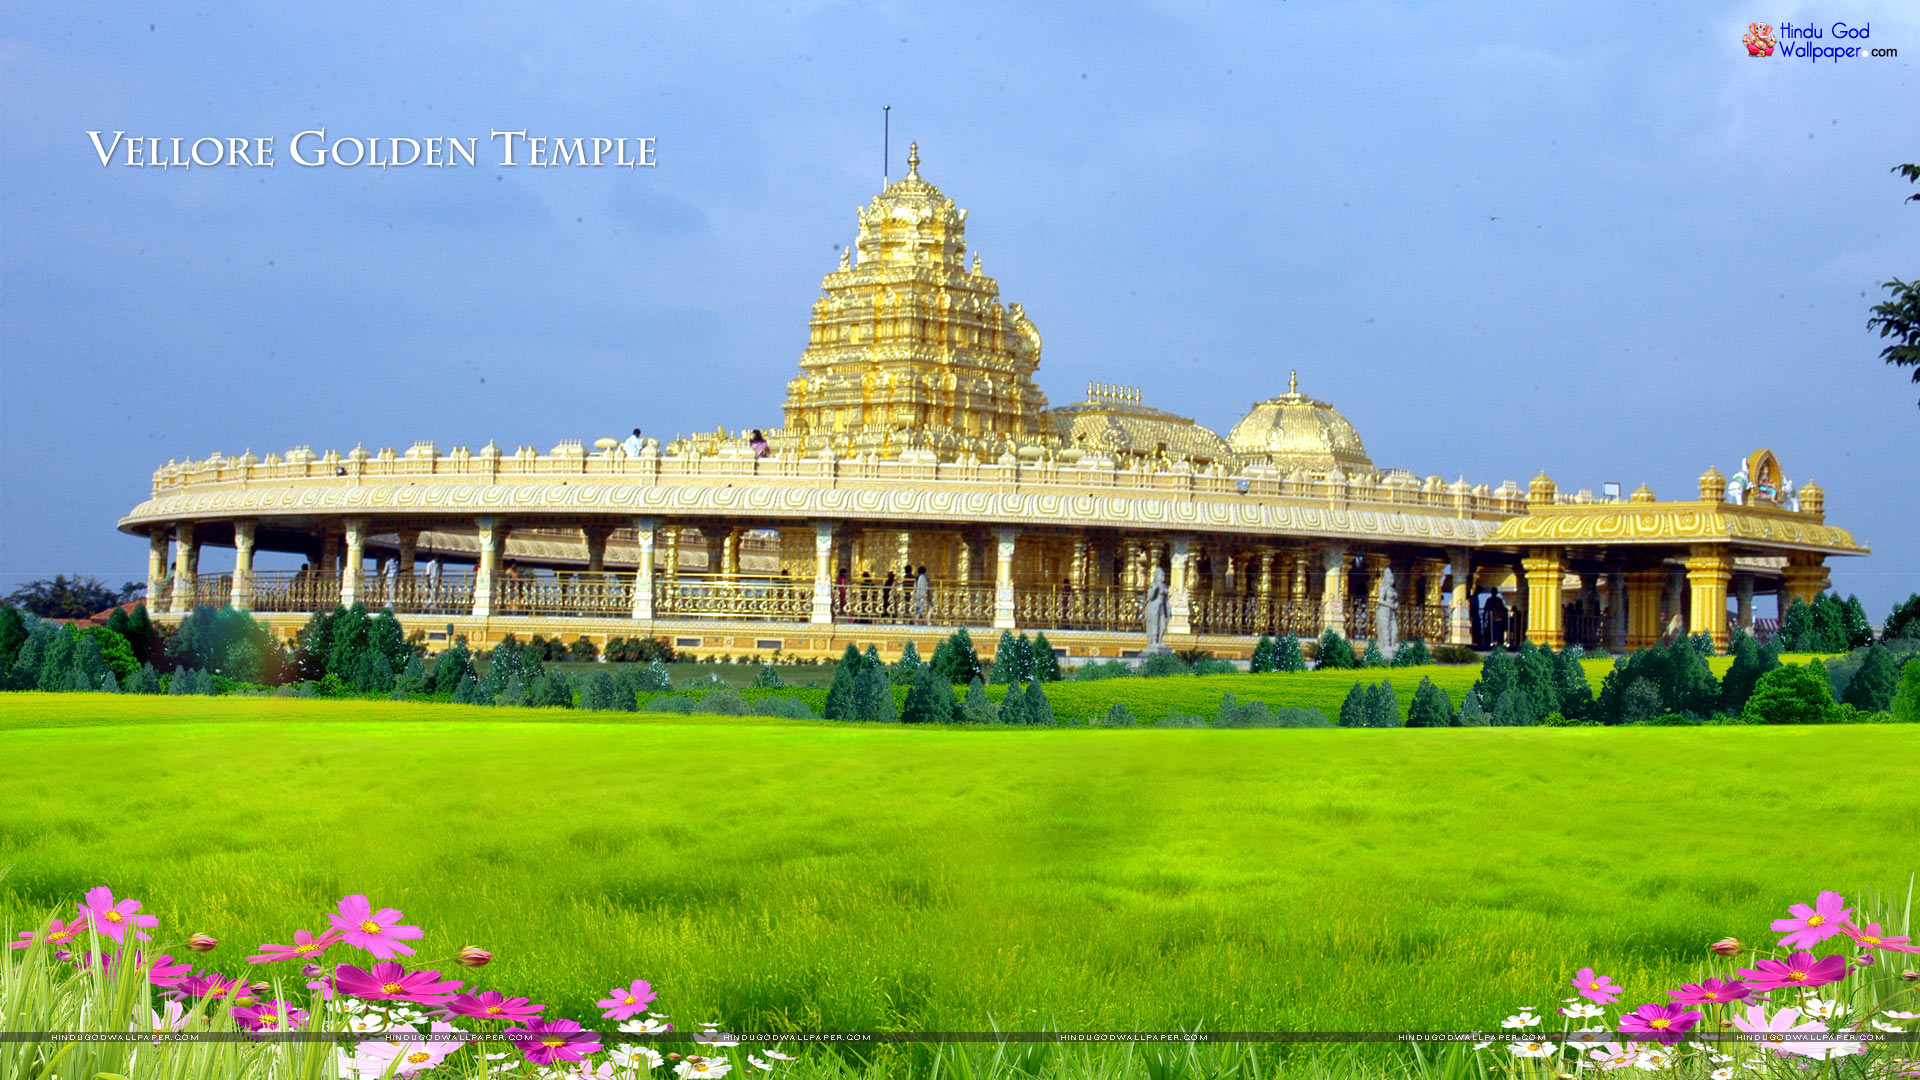 Vellore Golden Temple Wallpapers Photos Images Download